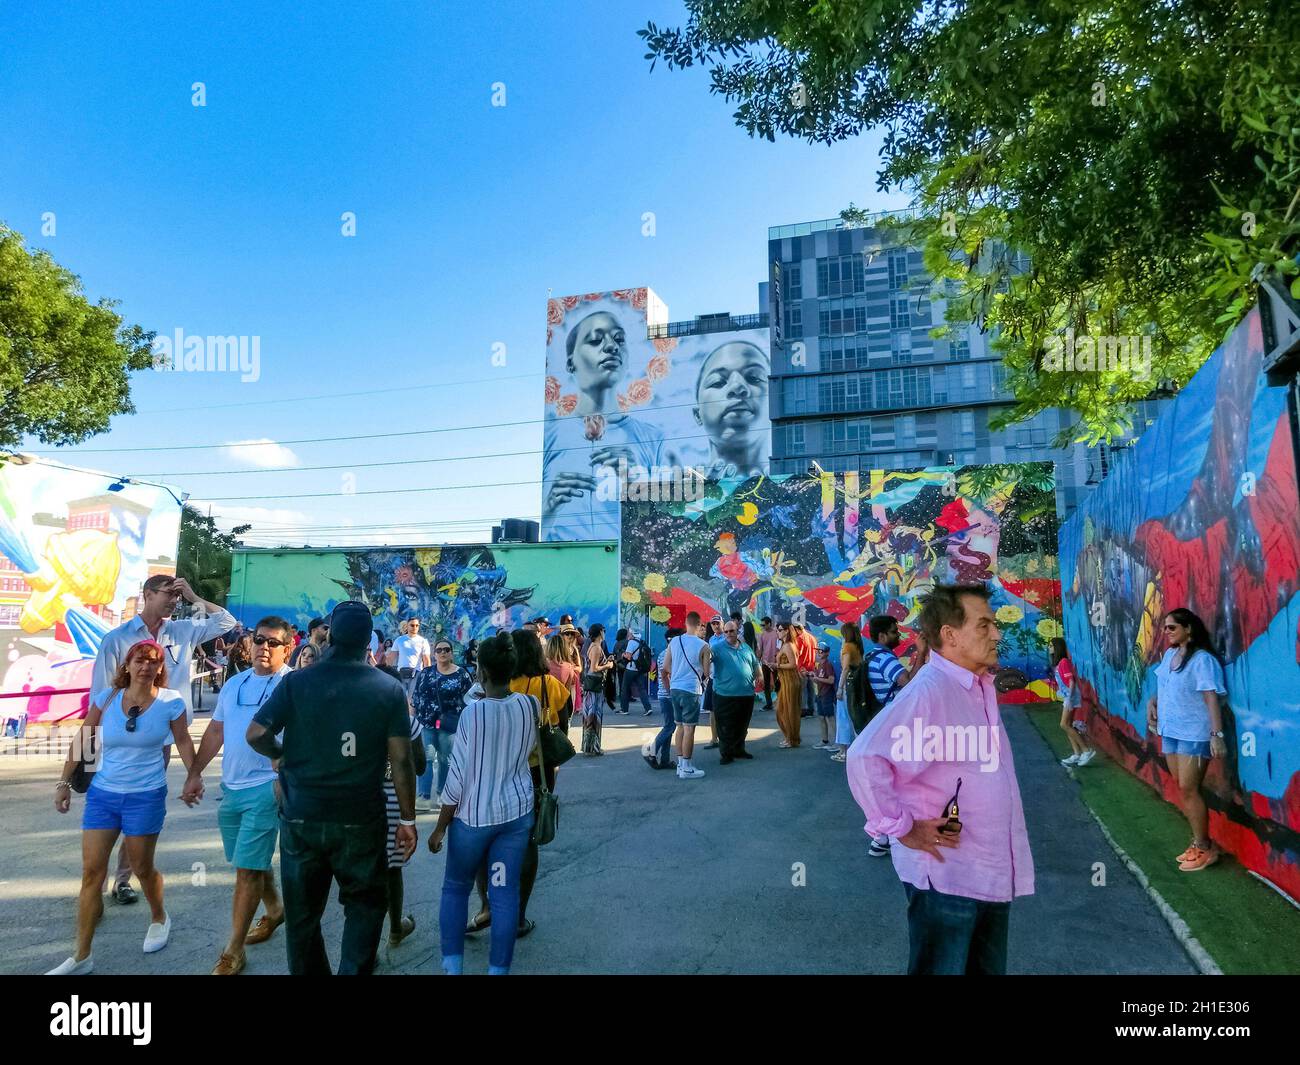 Miami, United States of America - November 30, 2019: The people at Art Wynwood in Miami, USA. Wynwood is a neighborhood in Miami Florida which has a s Stock Photo